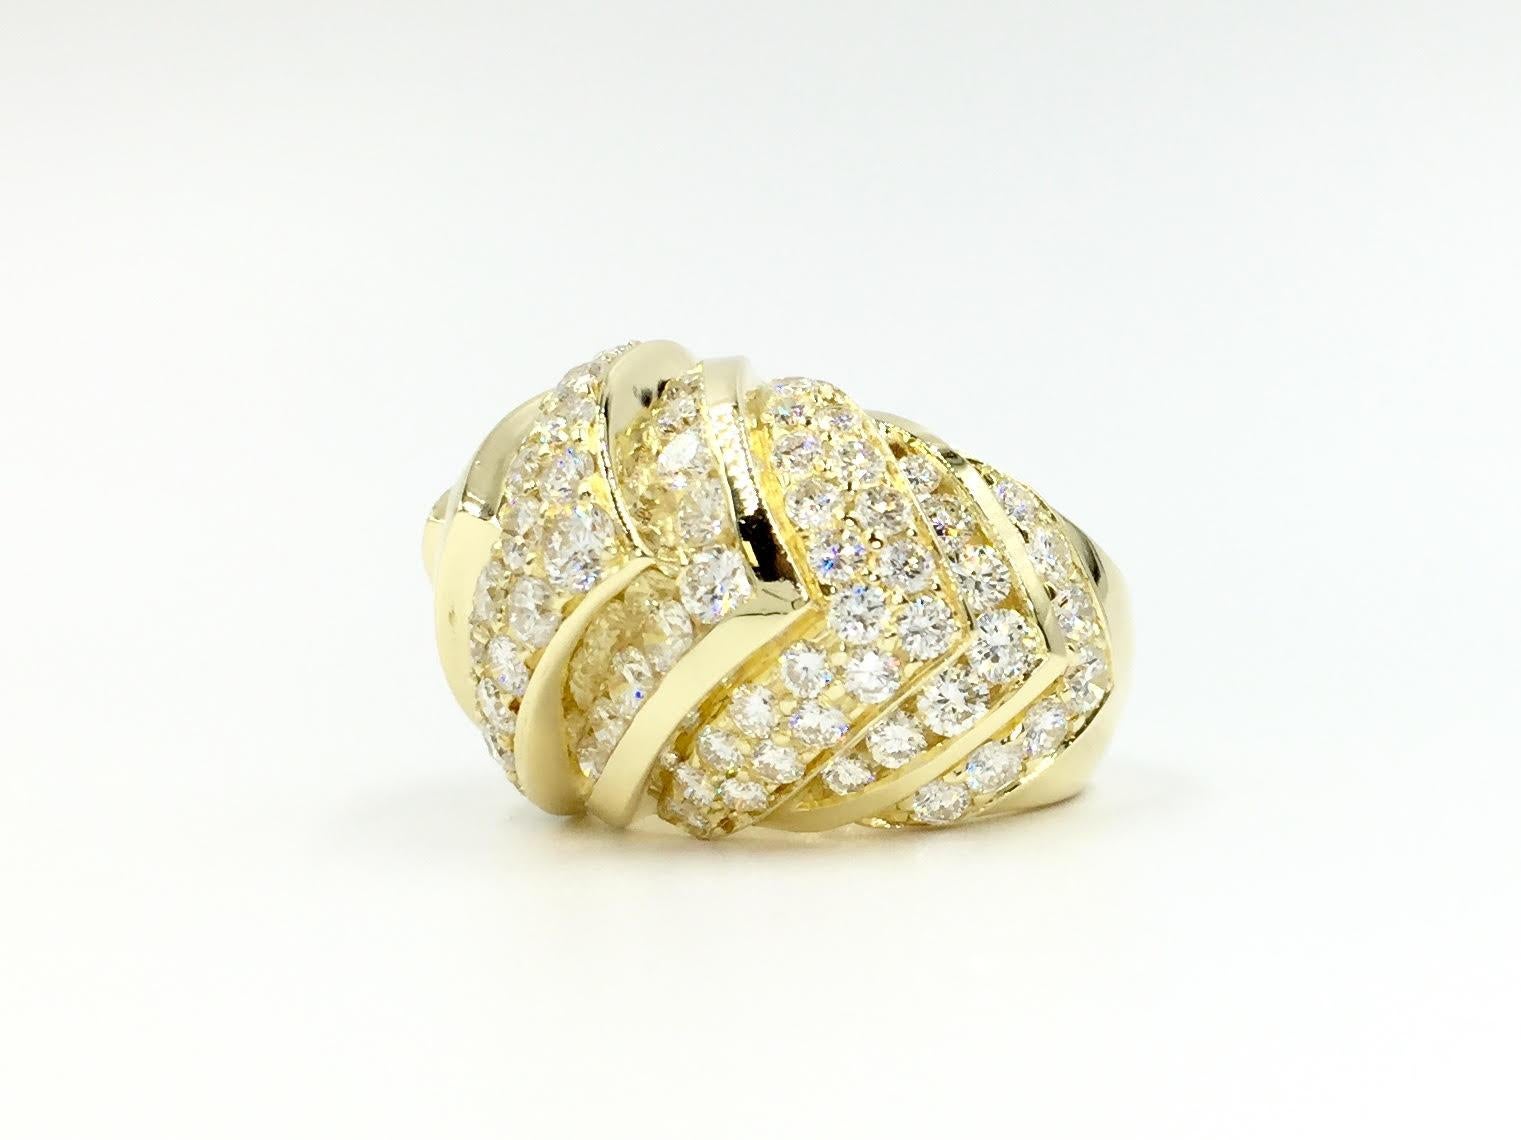 A show stopper 18 karat yellow gold domed ring featuring 5.37 carats of exceptional quality diamonds - approximately E color, VVS2 clarity. Diamonds are expertly set in a chevron style design using both channel set and prong set style. Ring has a